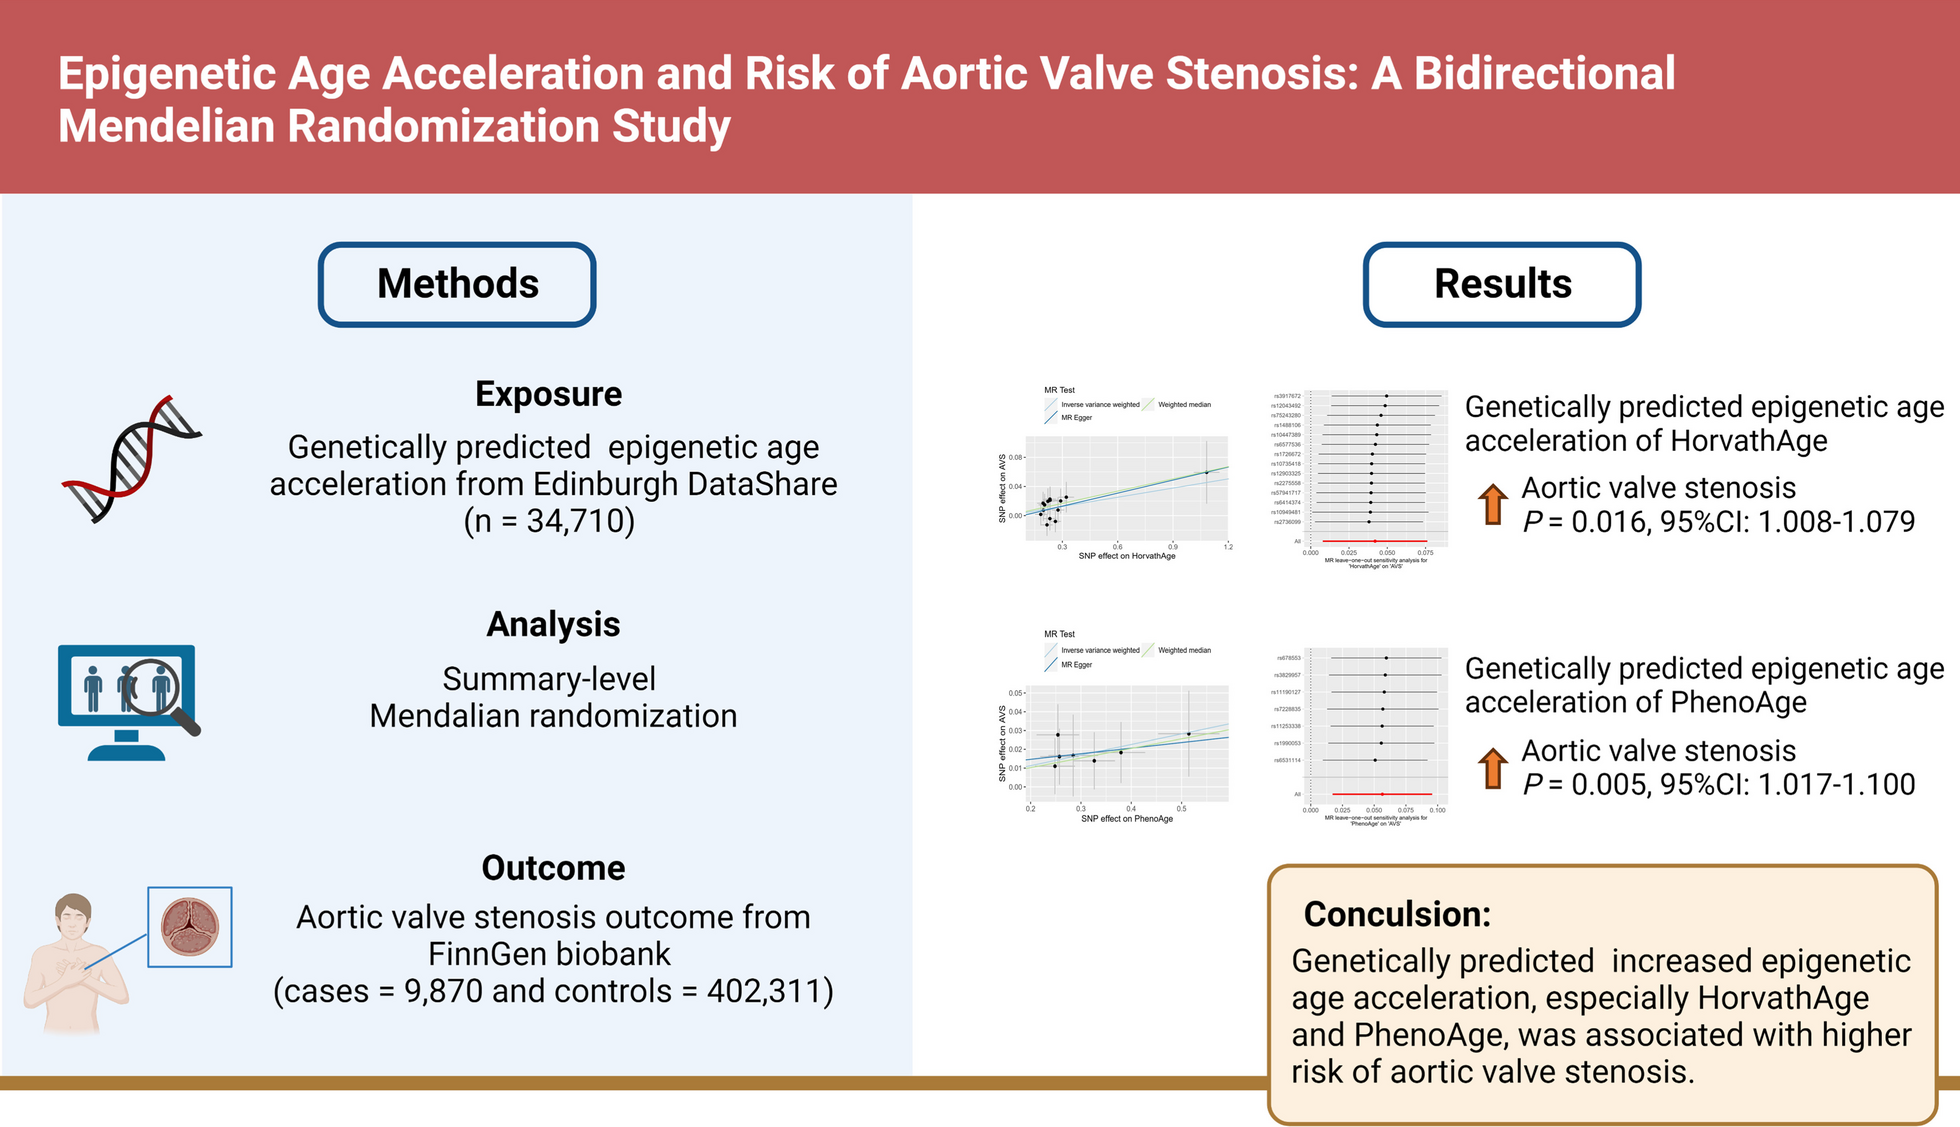 Epigenetic age acceleration and risk of aortic valve stenosis: a bidirectional Mendelian randomization study